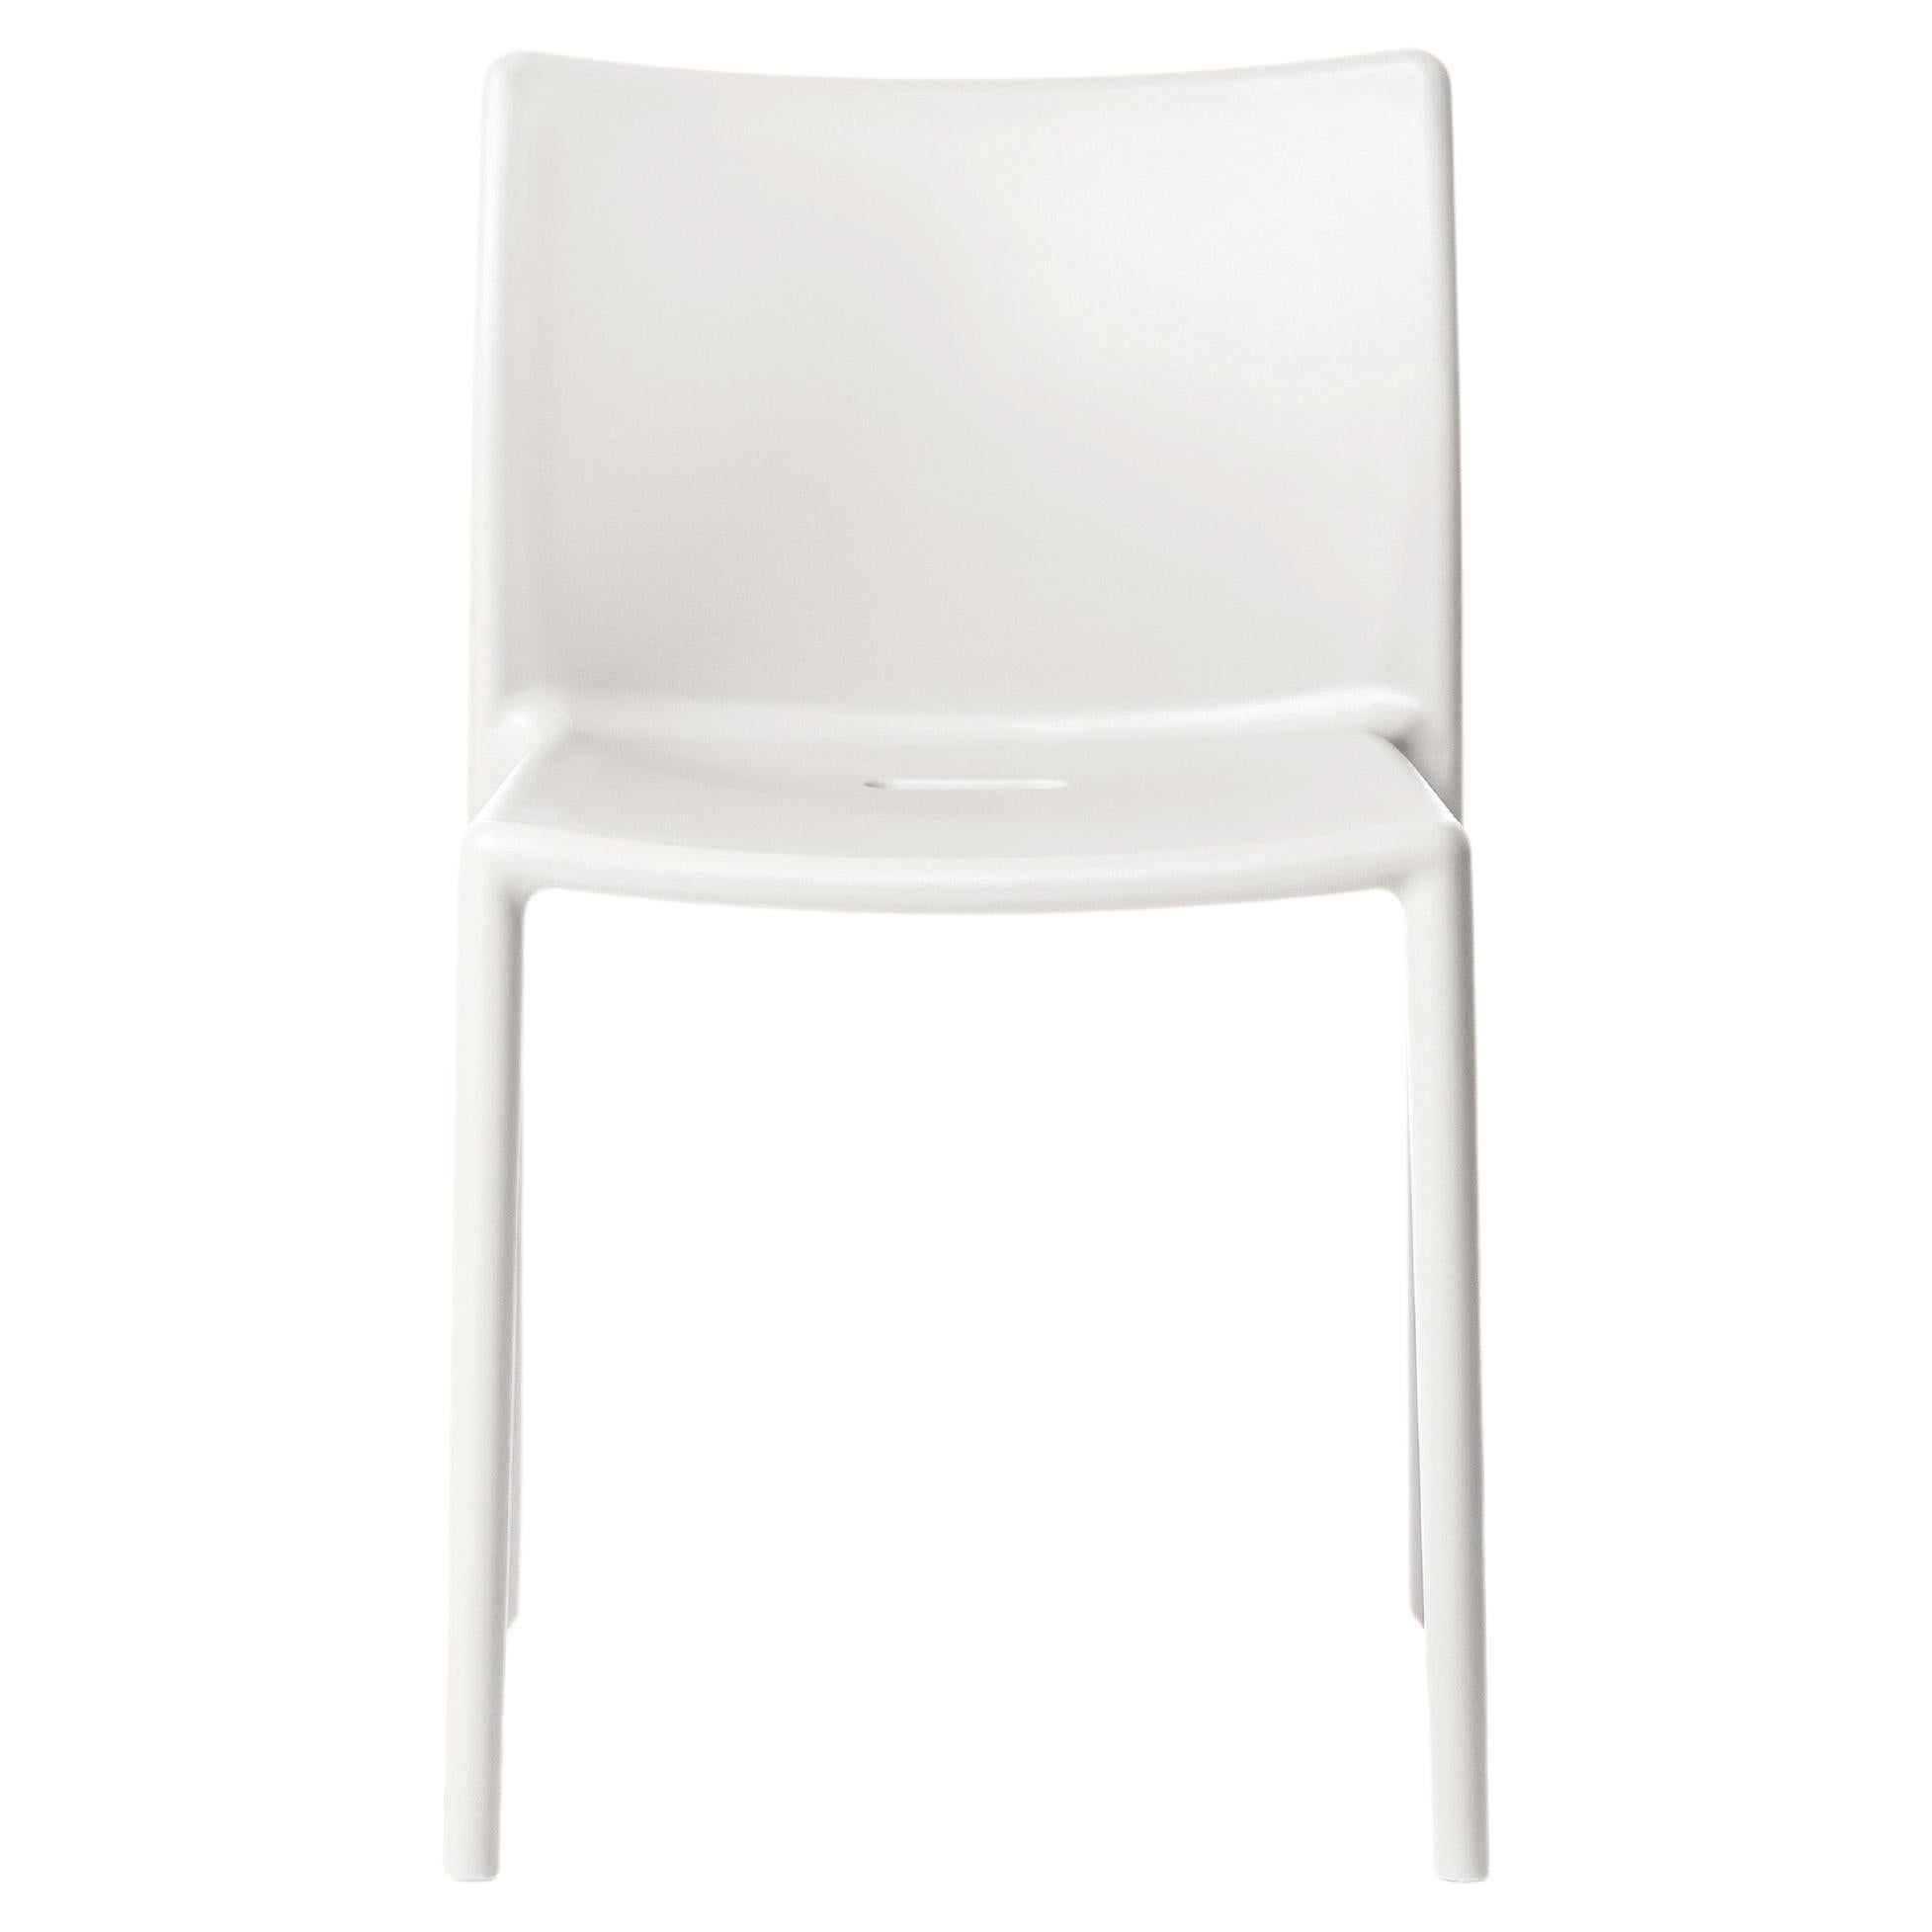 Set of 4 Air chair in White by Jasper Morrison  for MAGIS